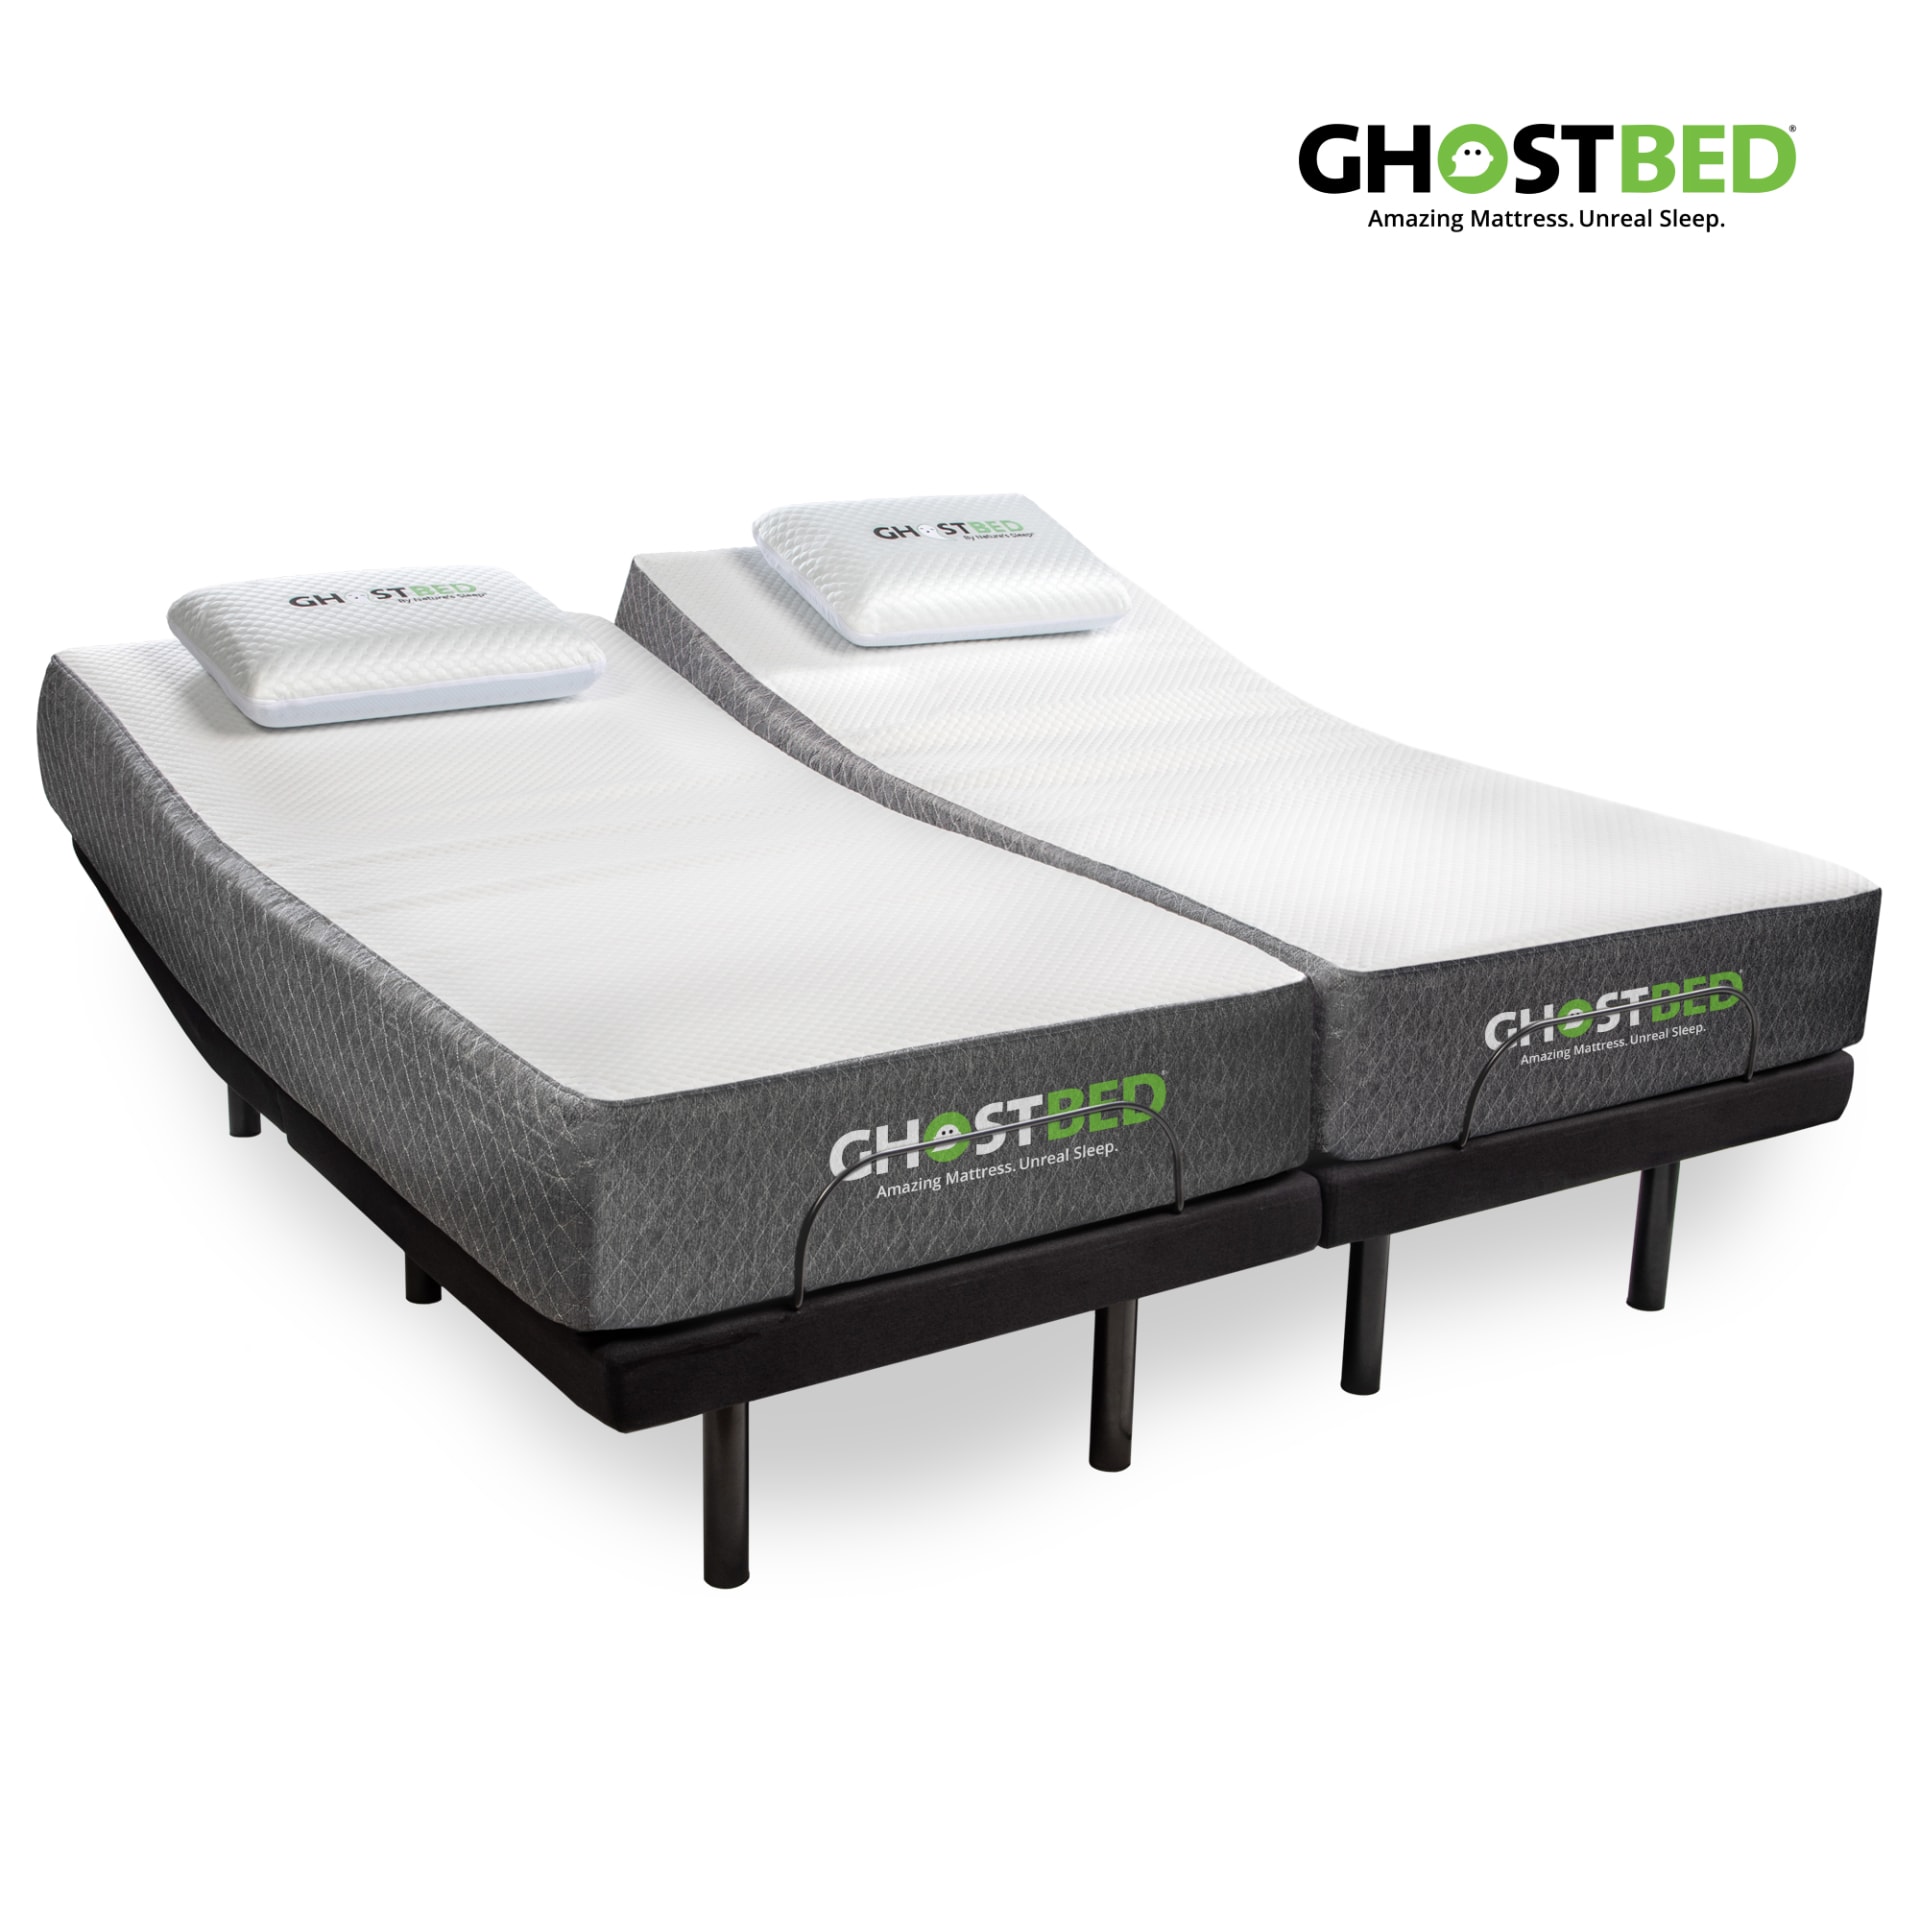 Ghostbed 11 Memory Foam Mattress With, King Size Bed Frame For Foam Mattress